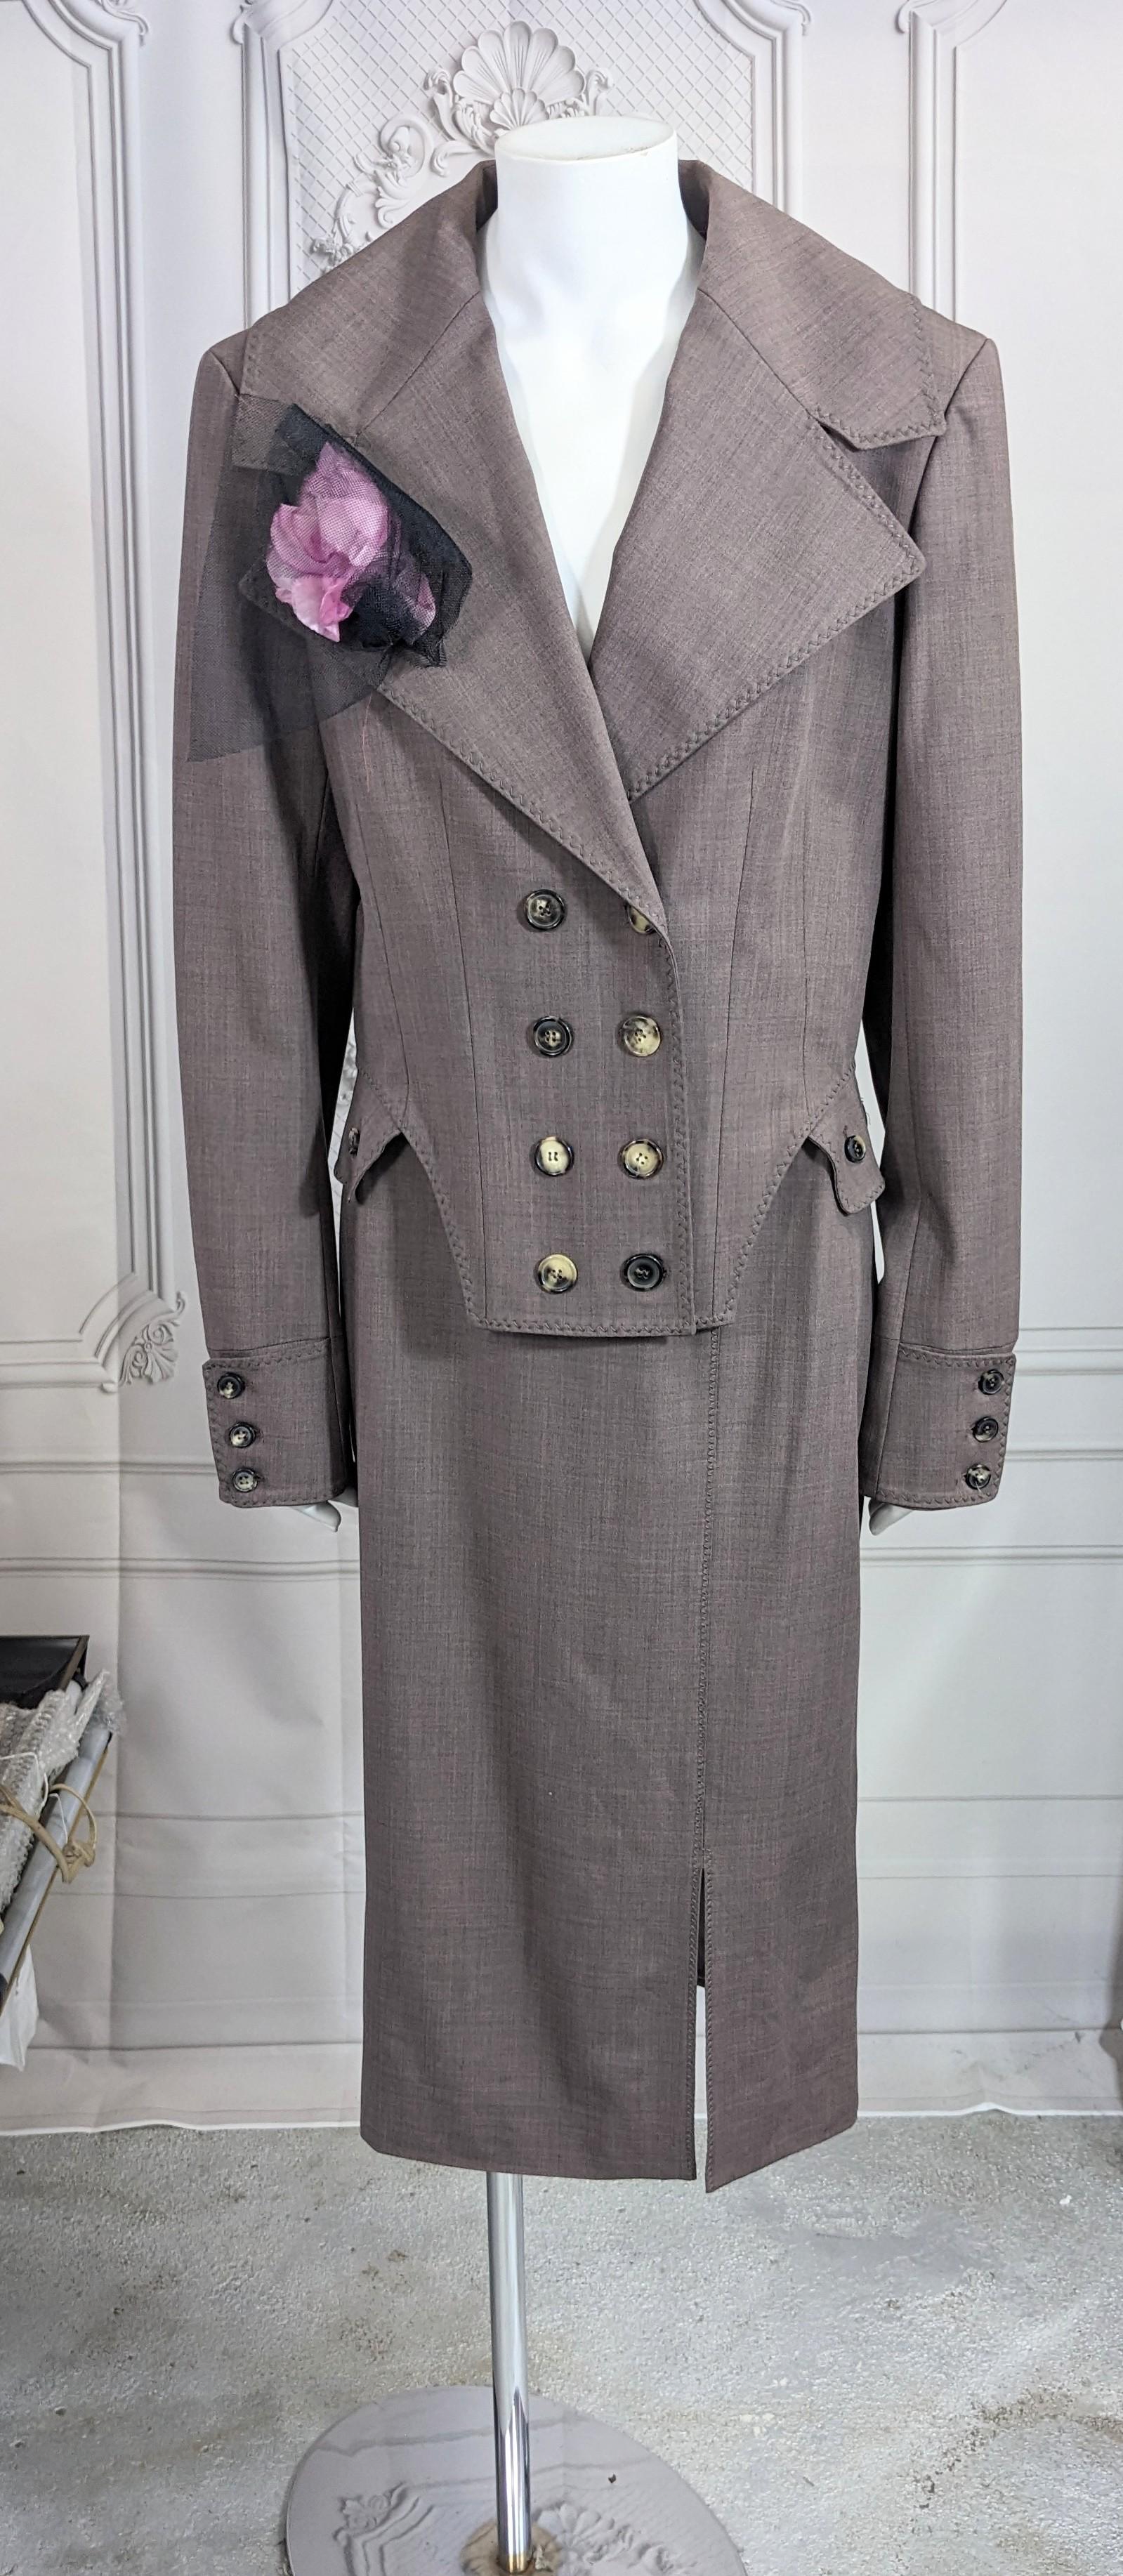 John Galliano Heathered Wool Two Piece Suit S/S 2001 For Sale 7